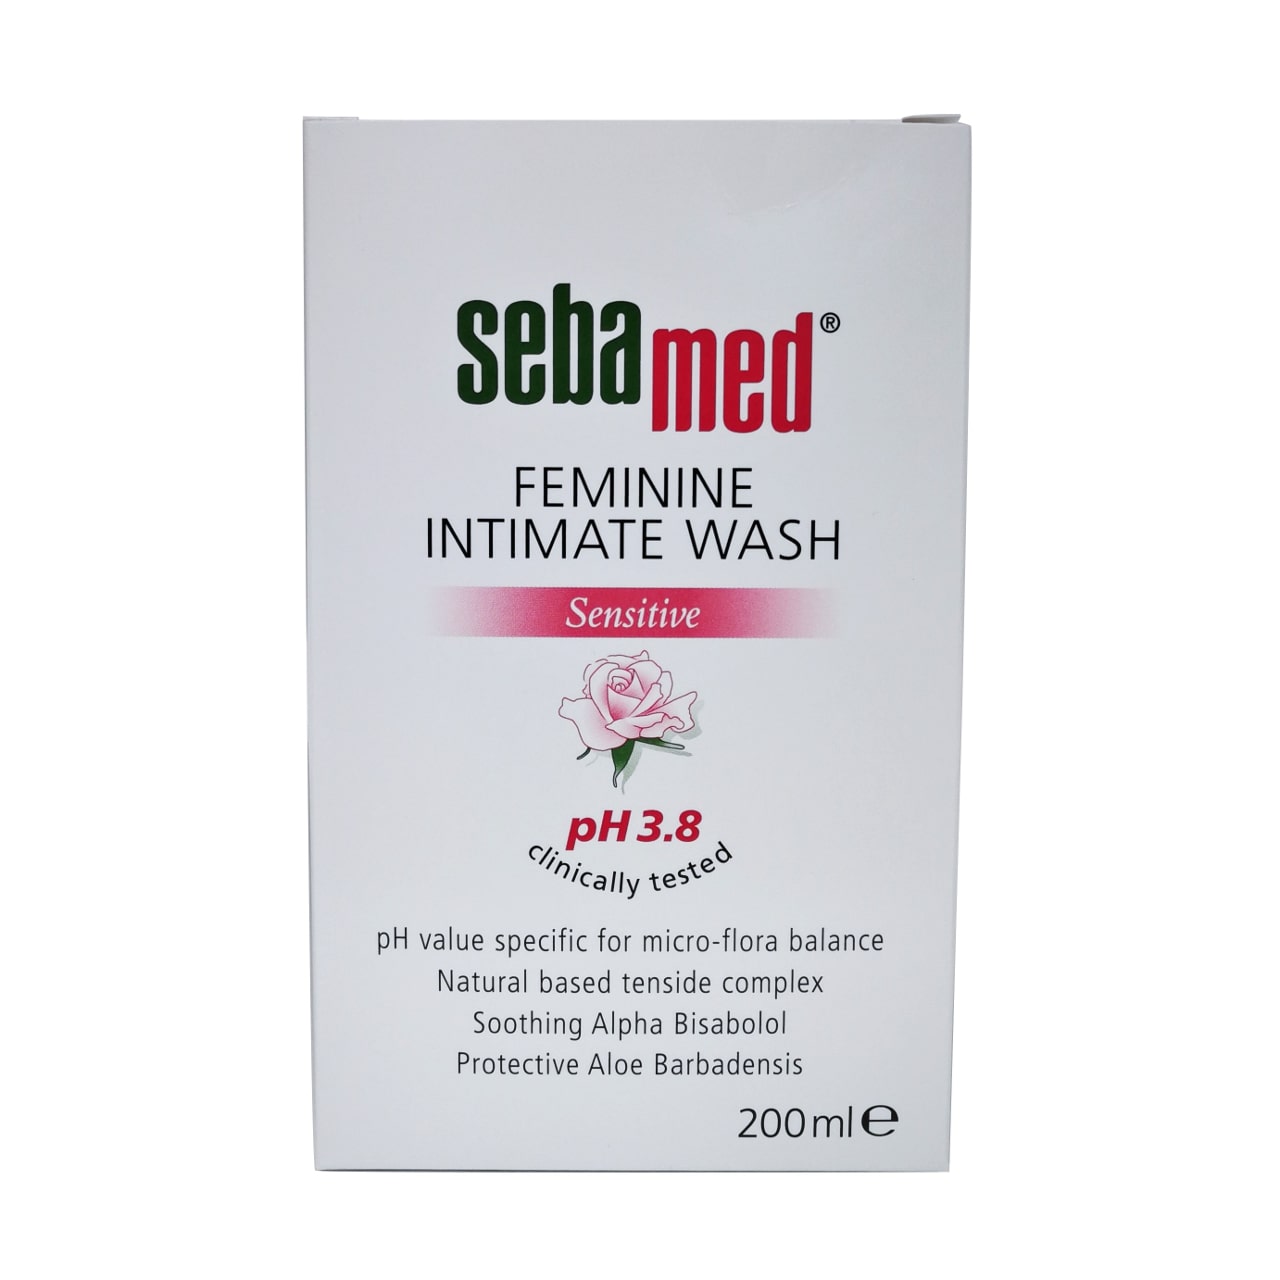 Product label for Sebamed Feminine Intimate Wash pH 3.8 in English